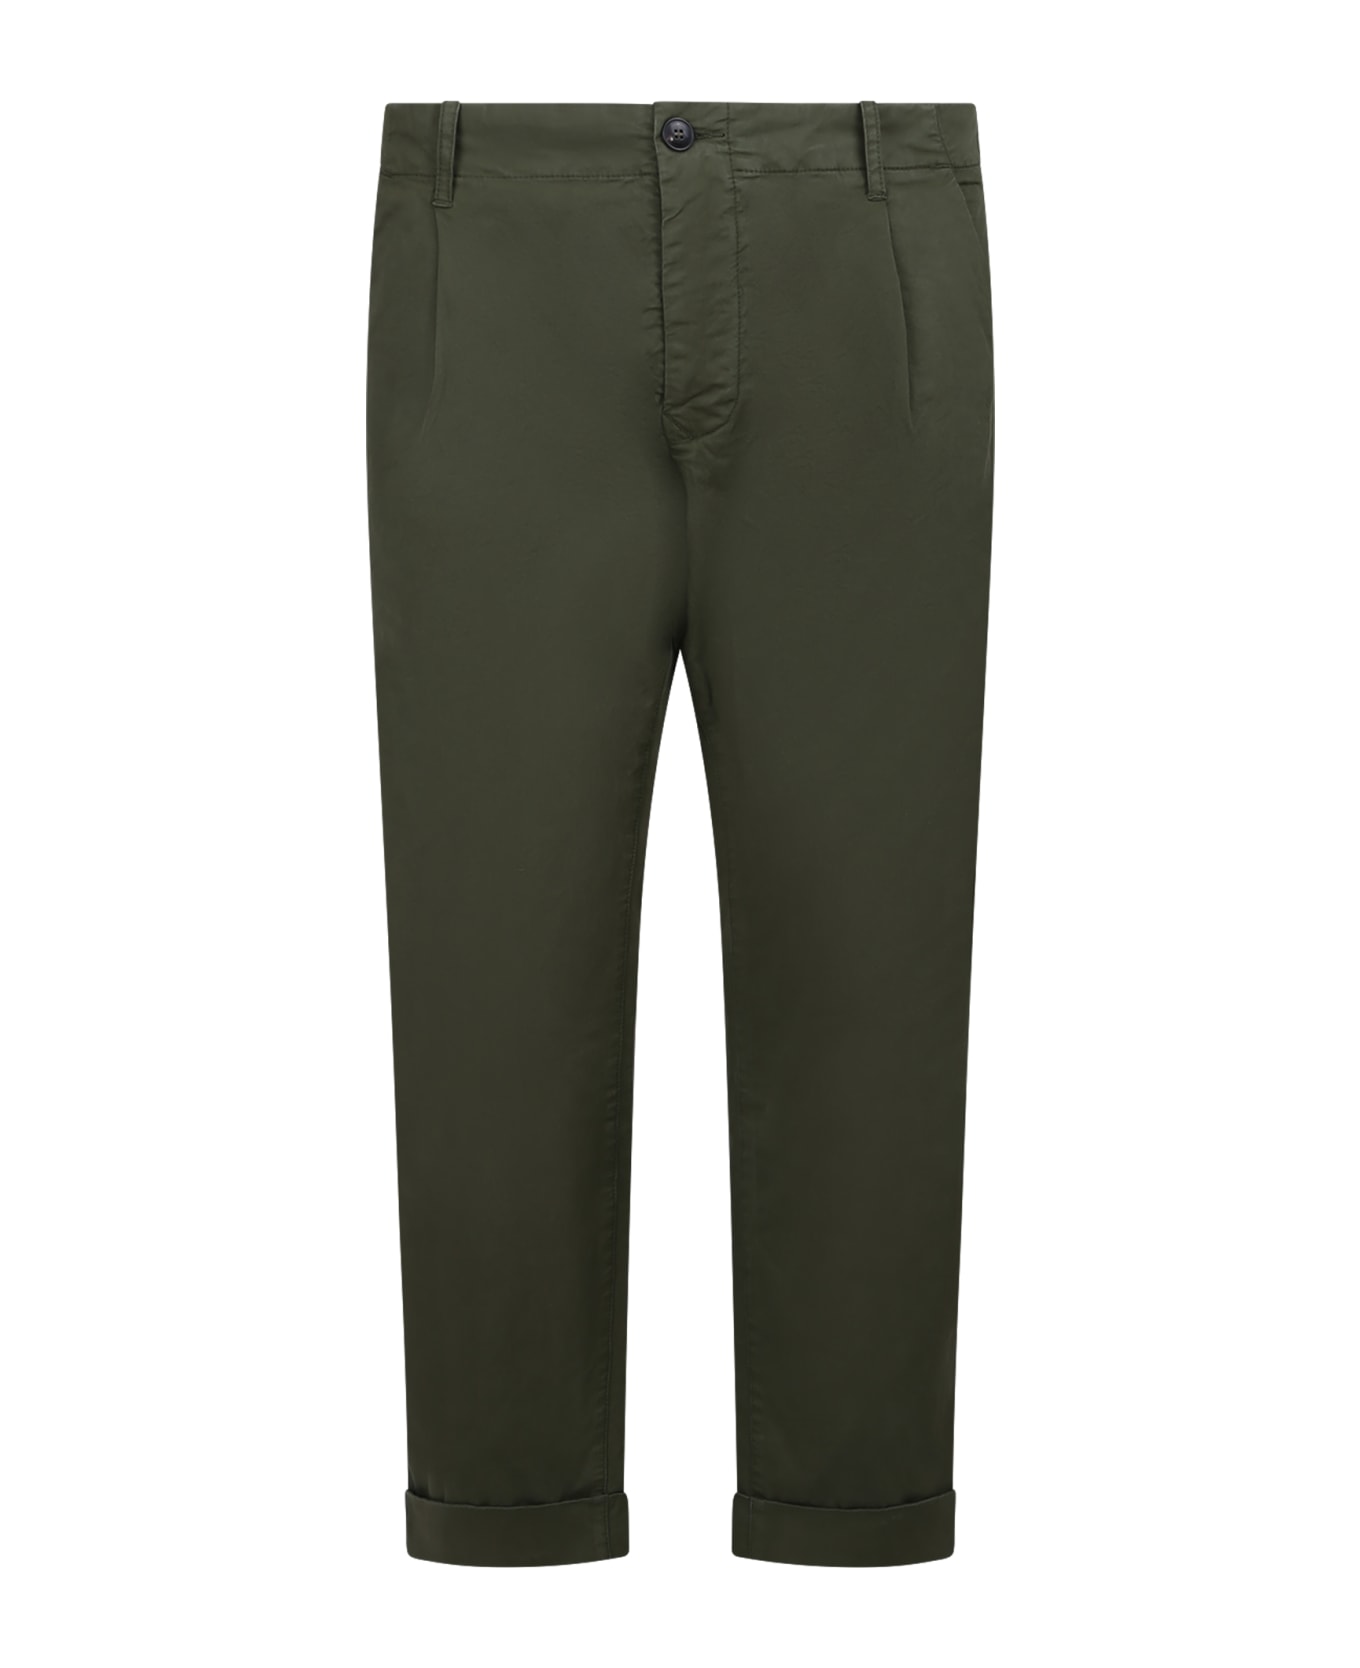 Original Vintage Style Trousers - Green